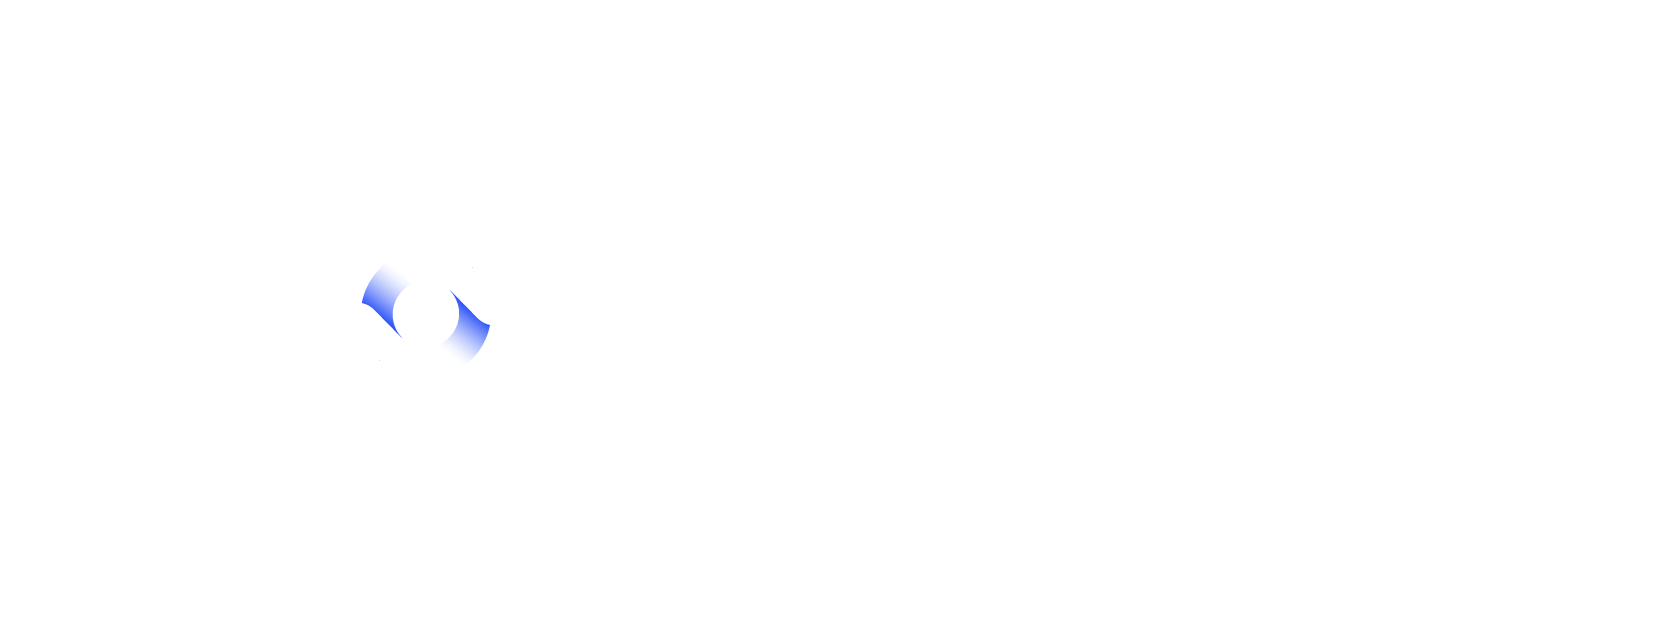 AuditBoard Expands Leadership Team for Next Phase of Growth